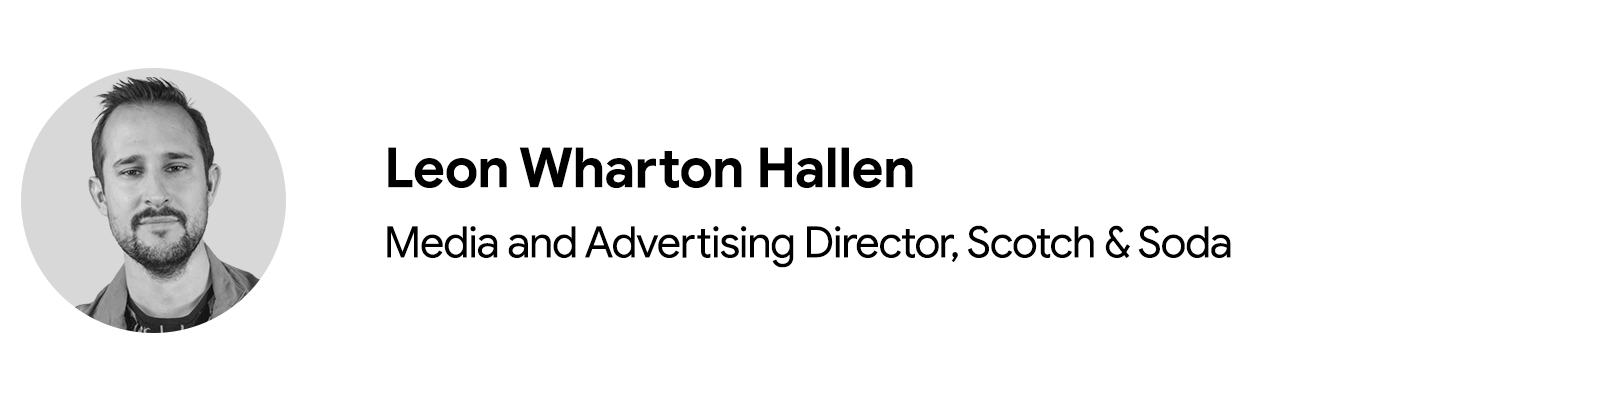 Leon Wharton Hallen, Media and Advertising Director, Scotch & Soda is pictured from the shoulders up. Hallen has light skin and short, spiky brown hair, and wears a collared jacket and black, round-neck shirt.